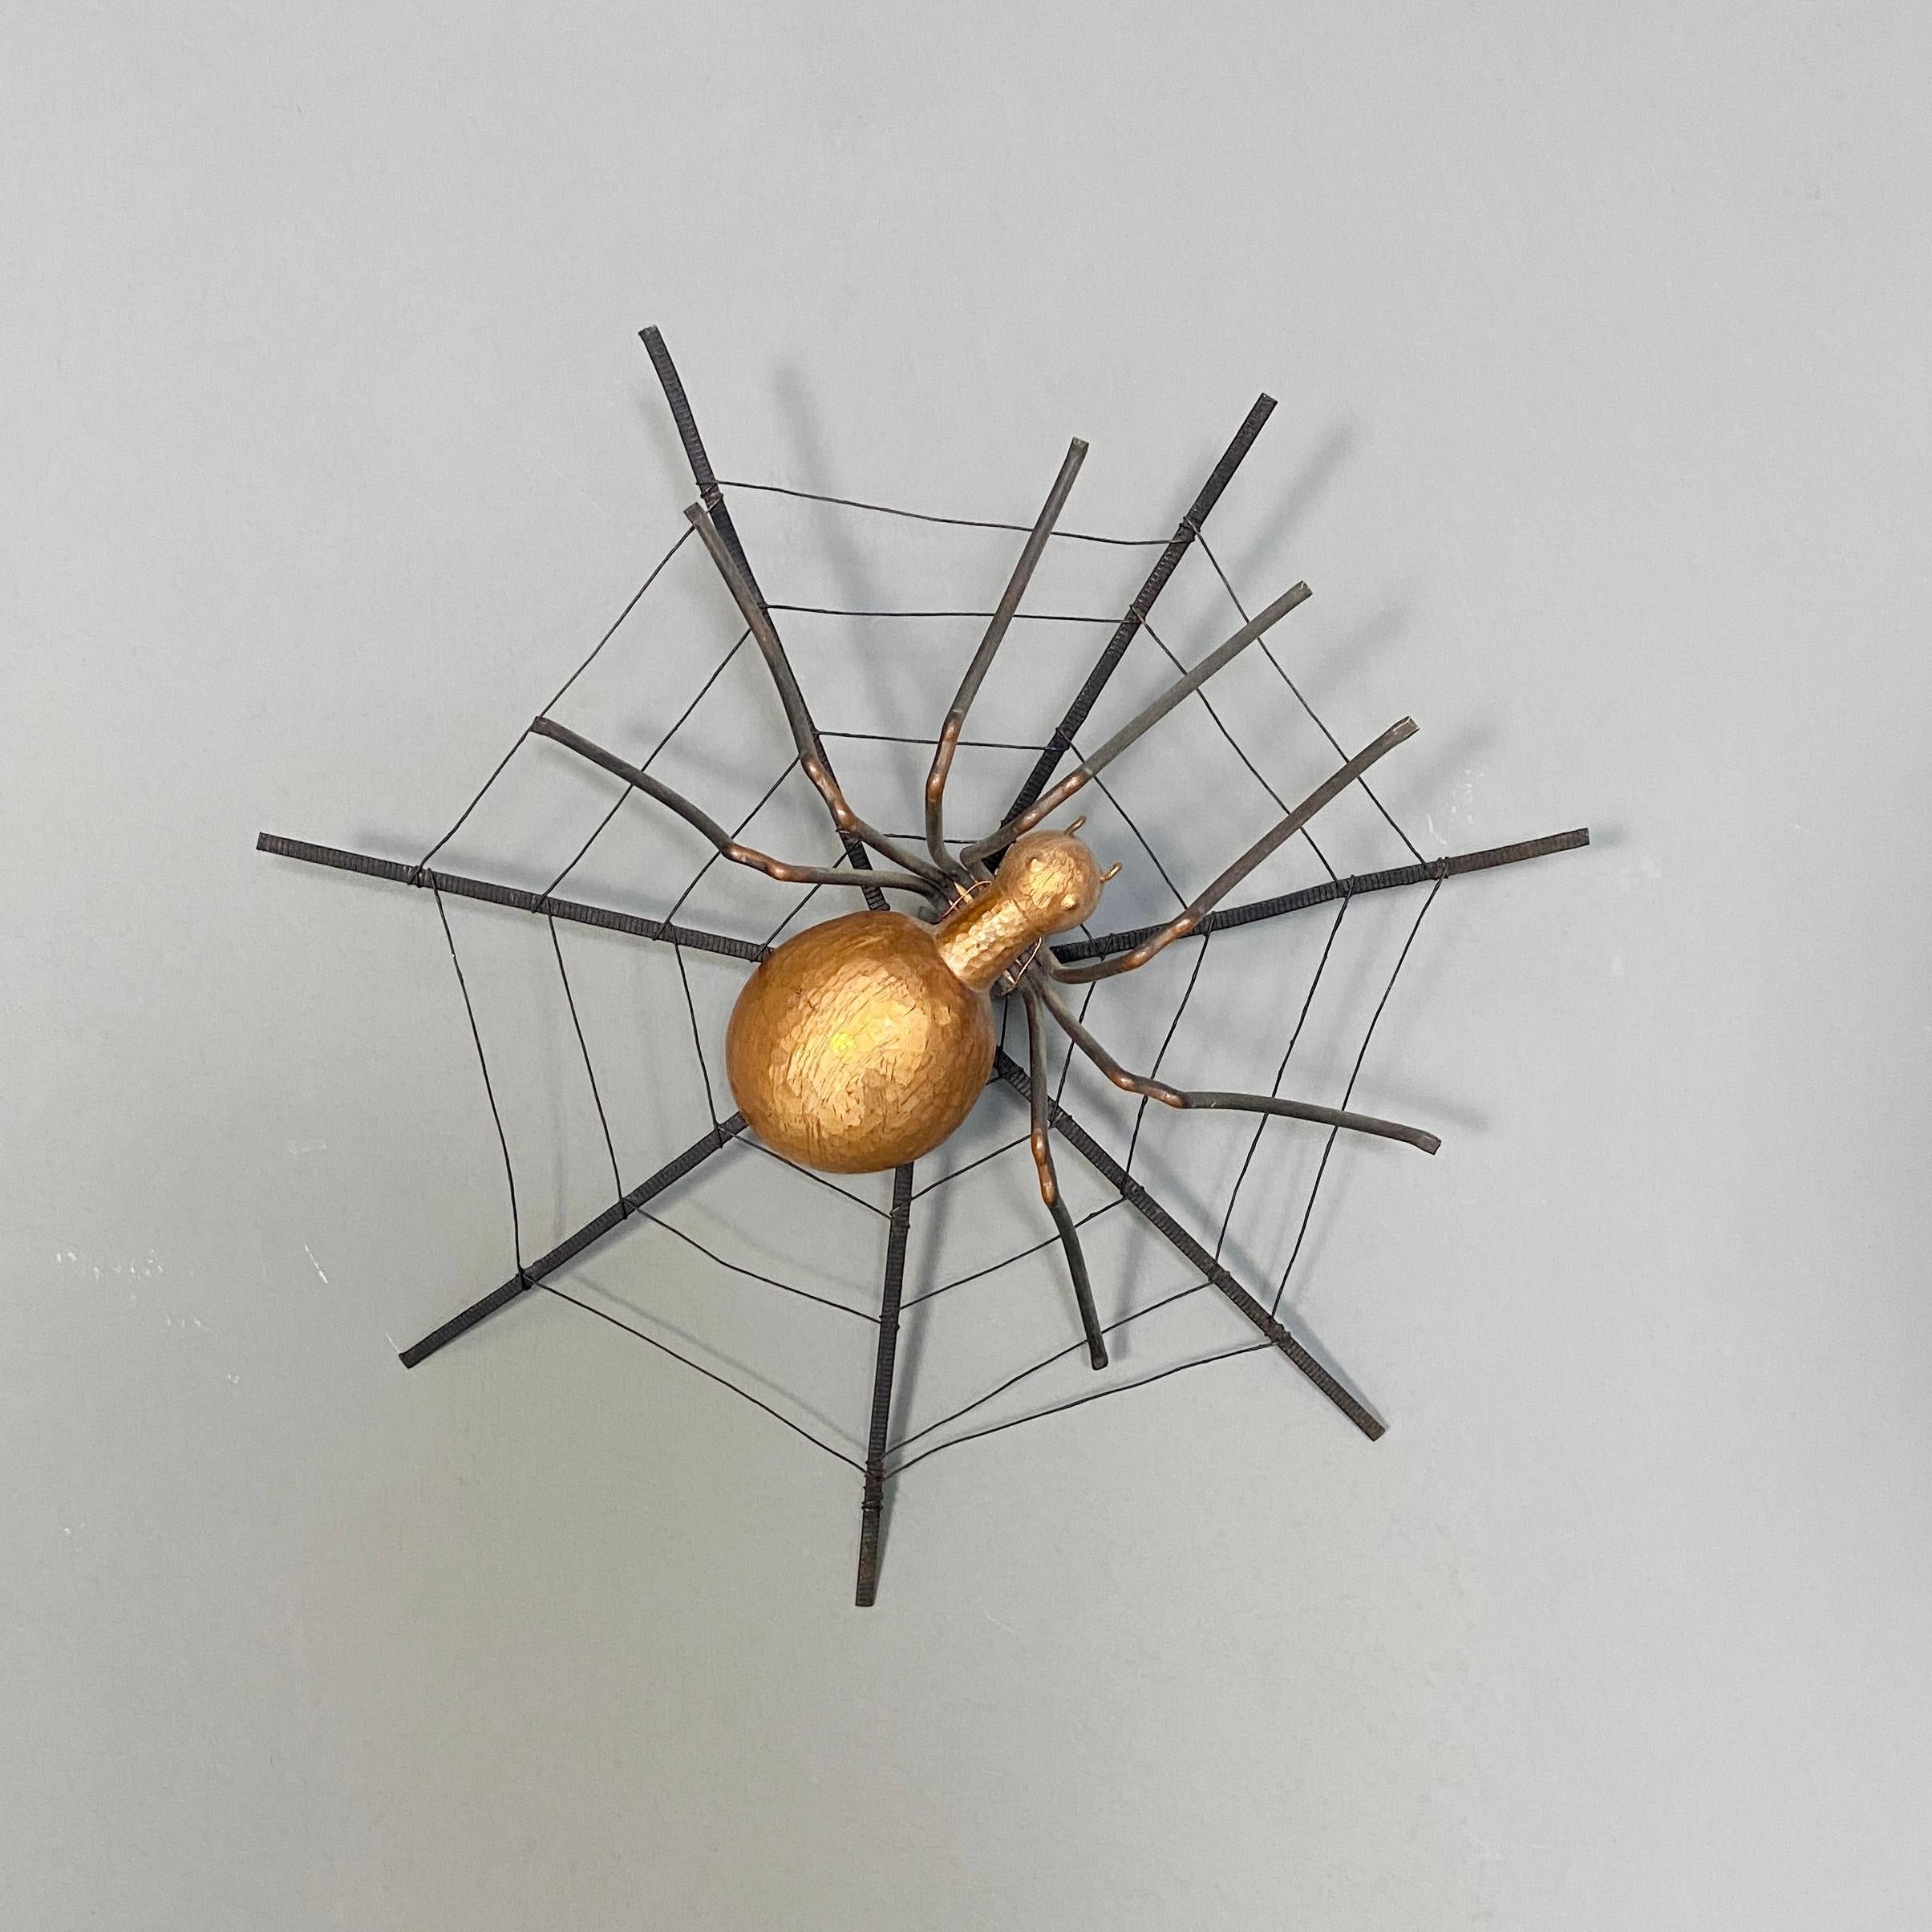 Italian Mid-Century Modern Spider-Shaped Wall Decoration, 1960s For Sale 1